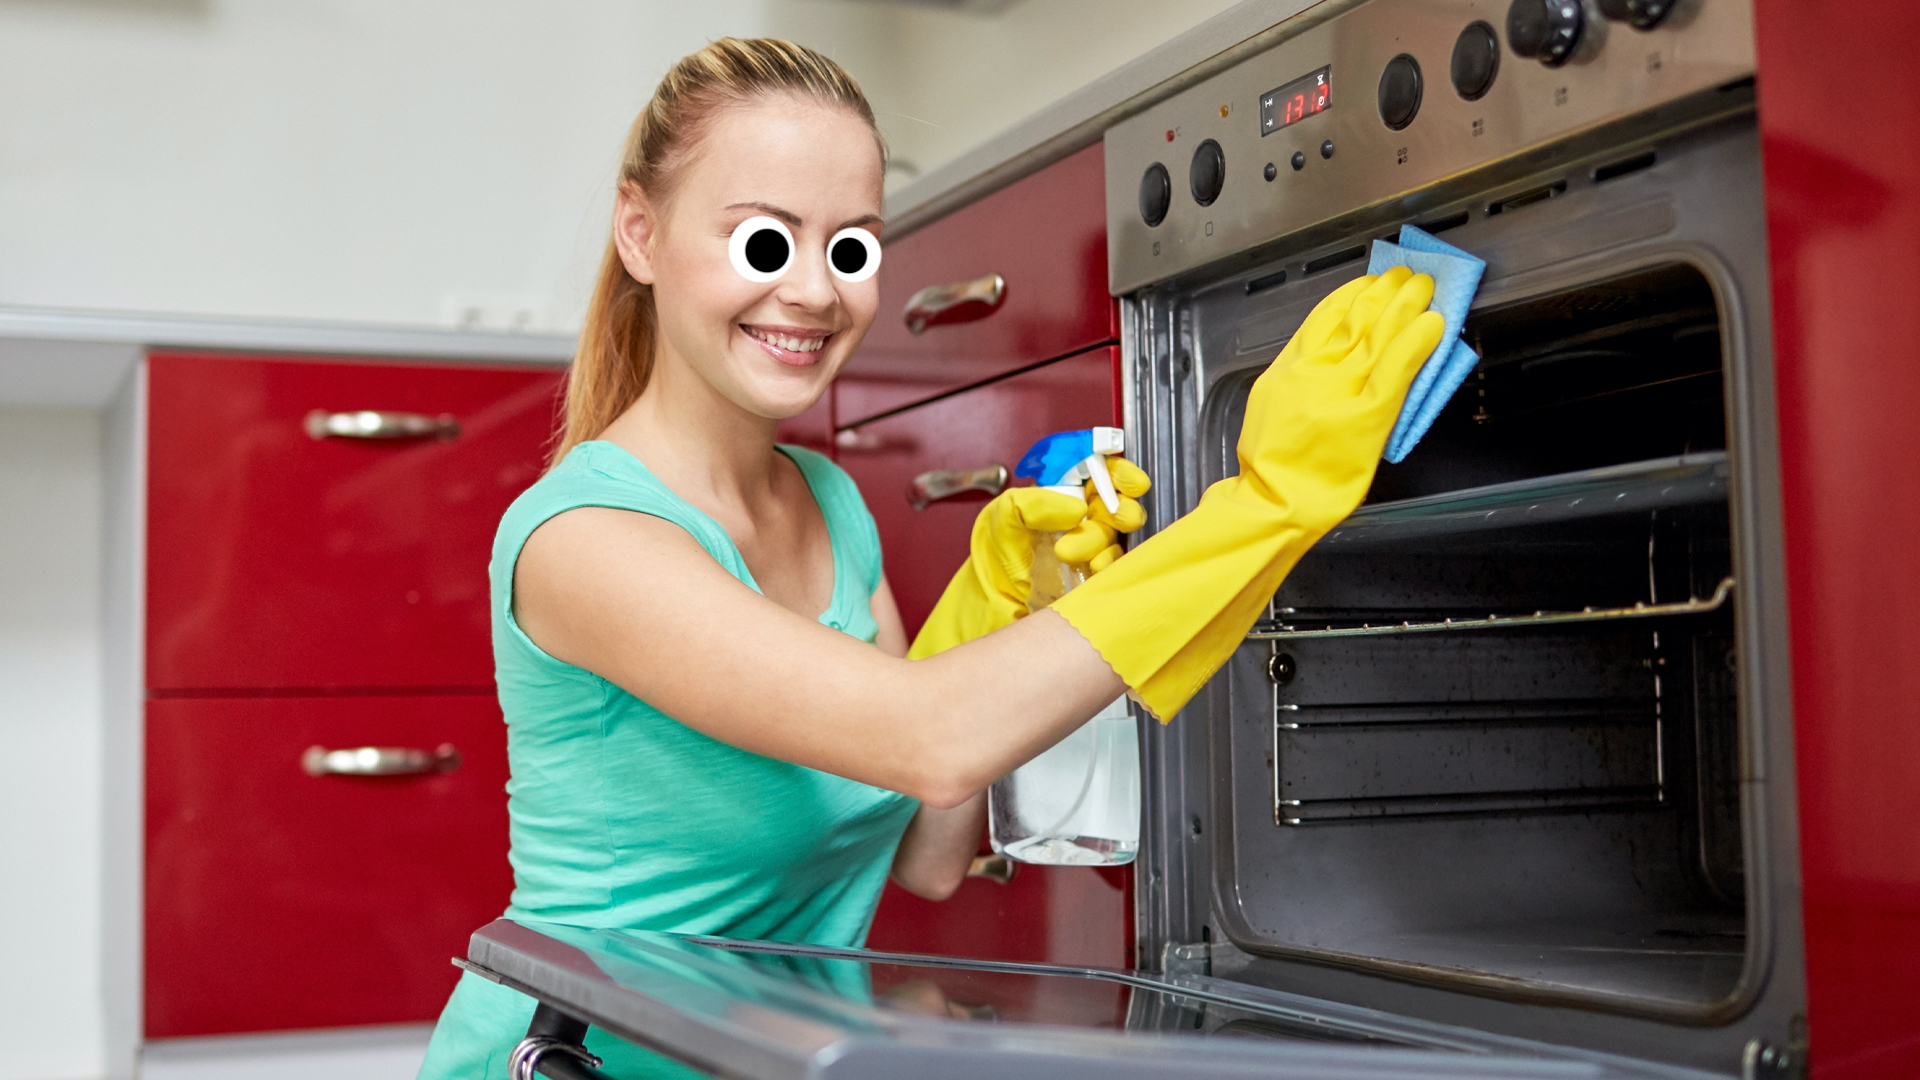 A woman smiling as she cleans an oven